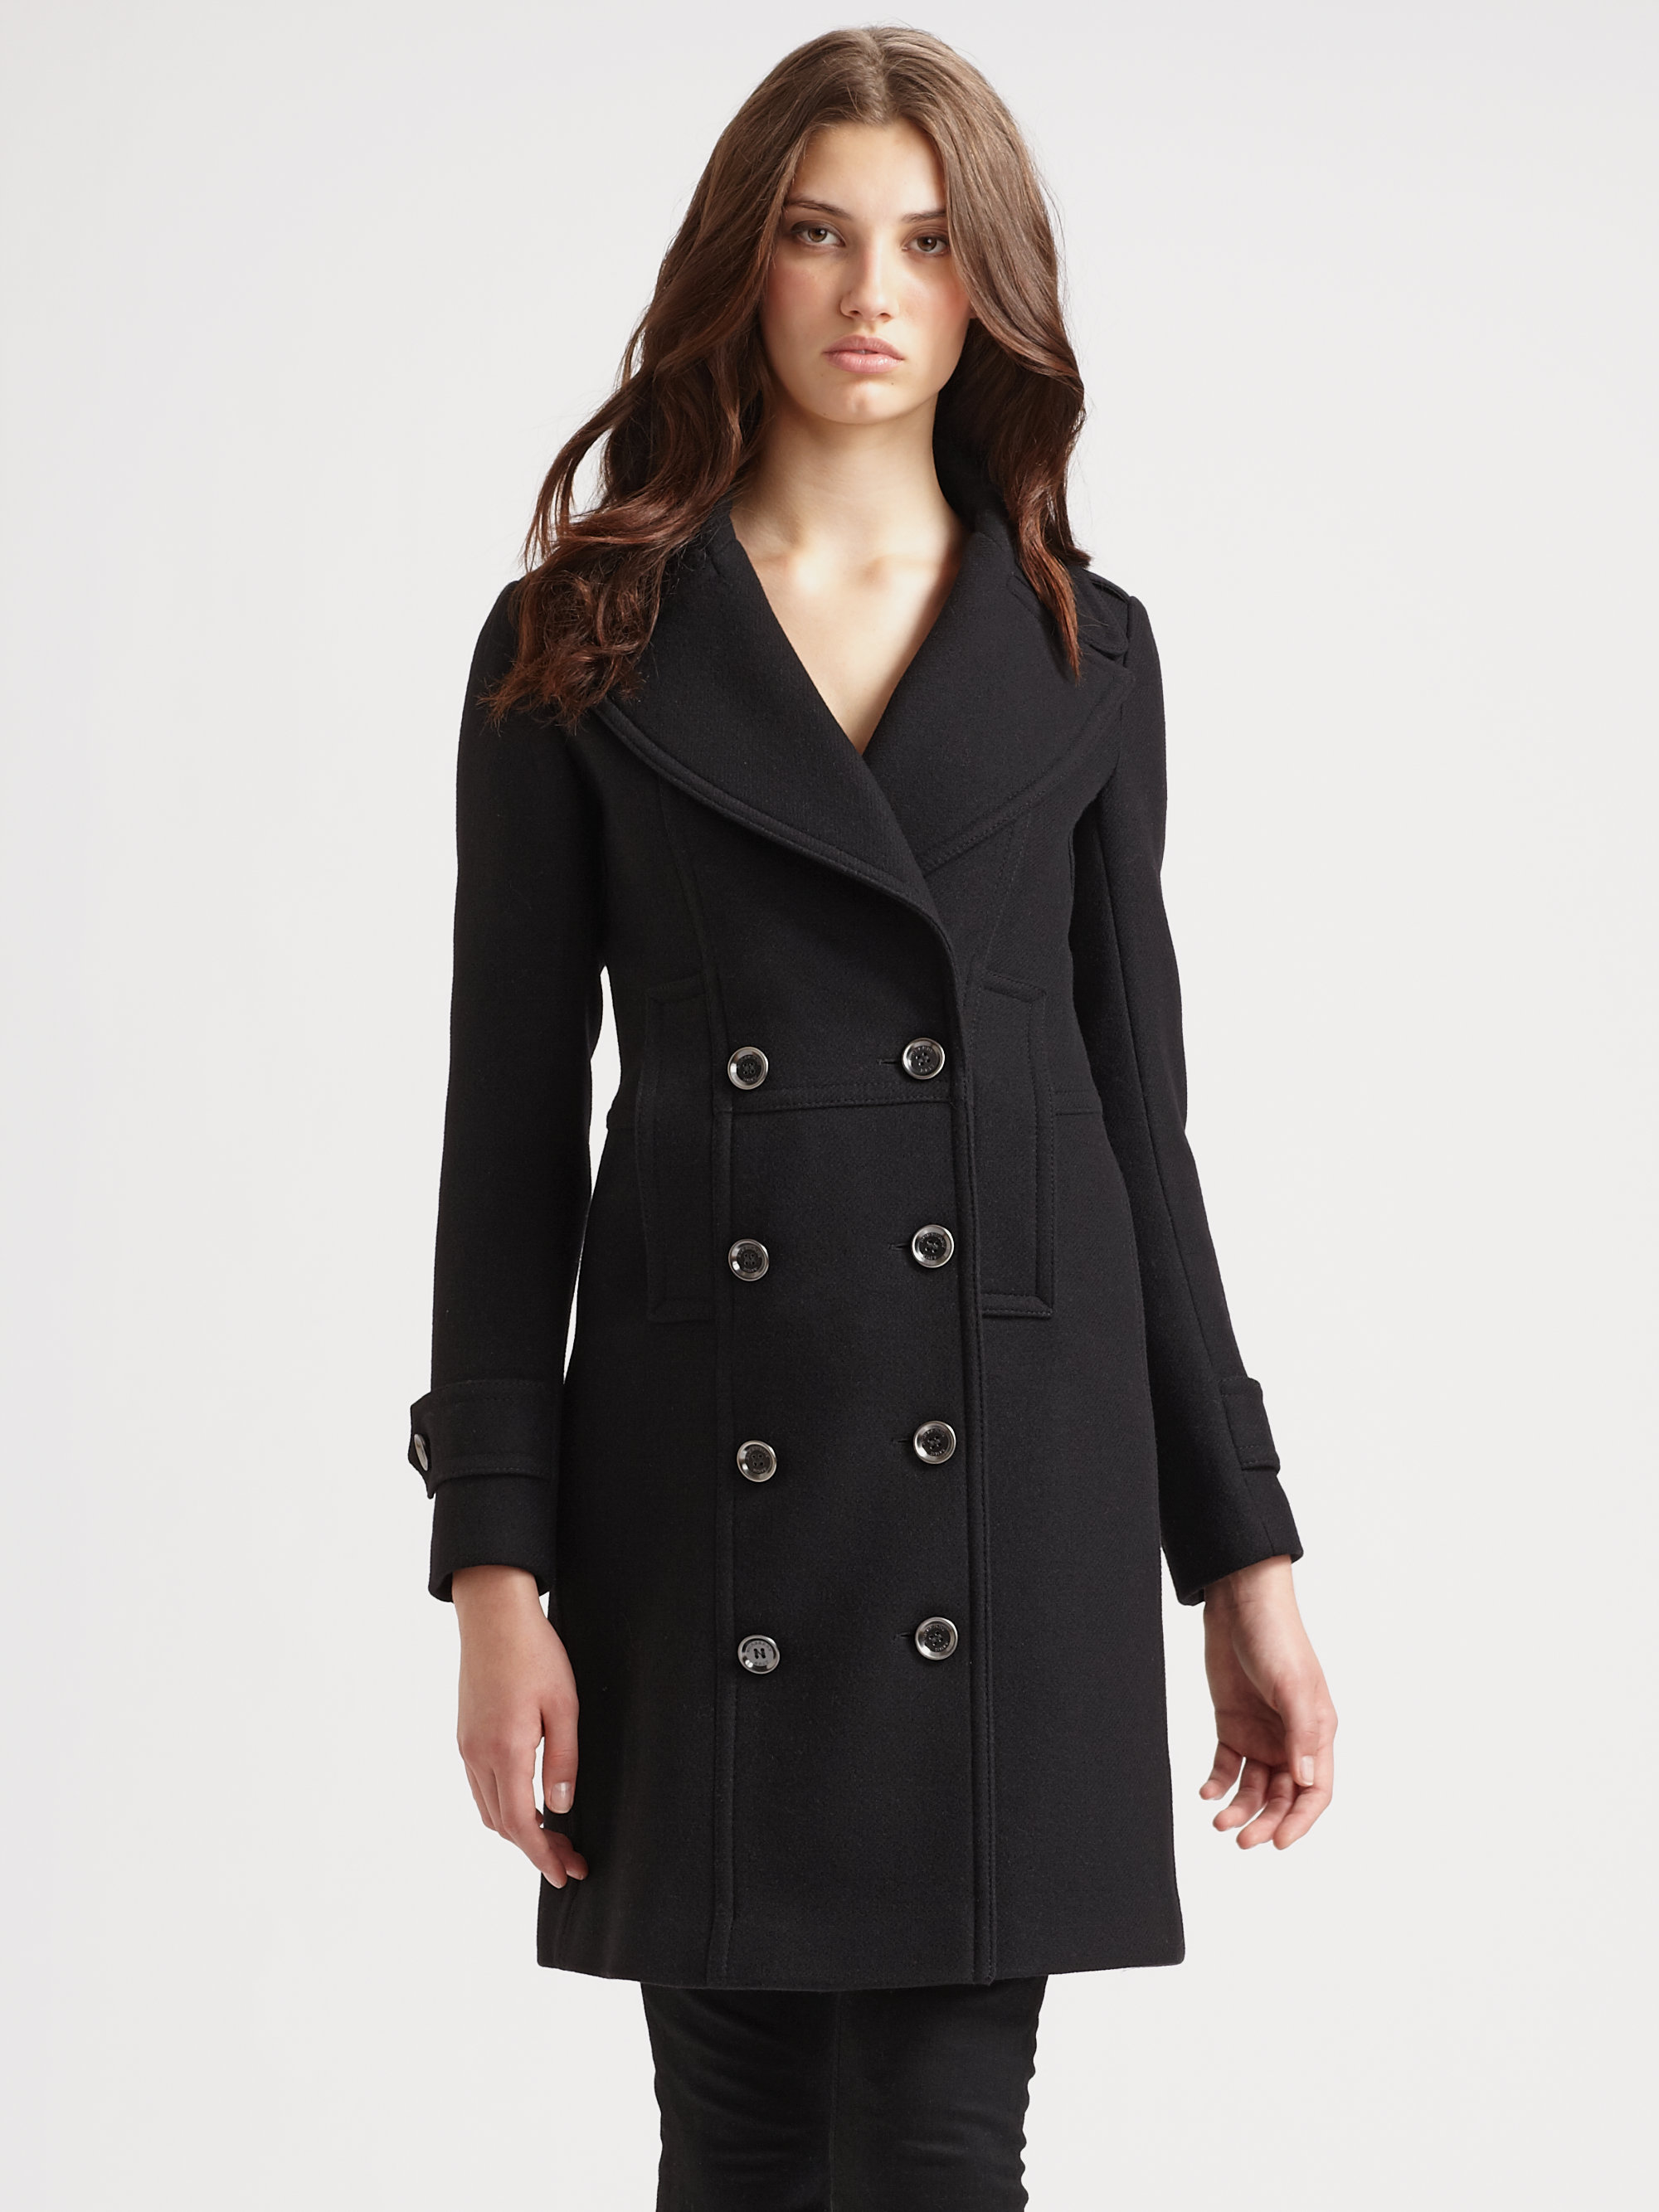 Burberry Brit Double Breasted Wool Coat in Black | Lyst